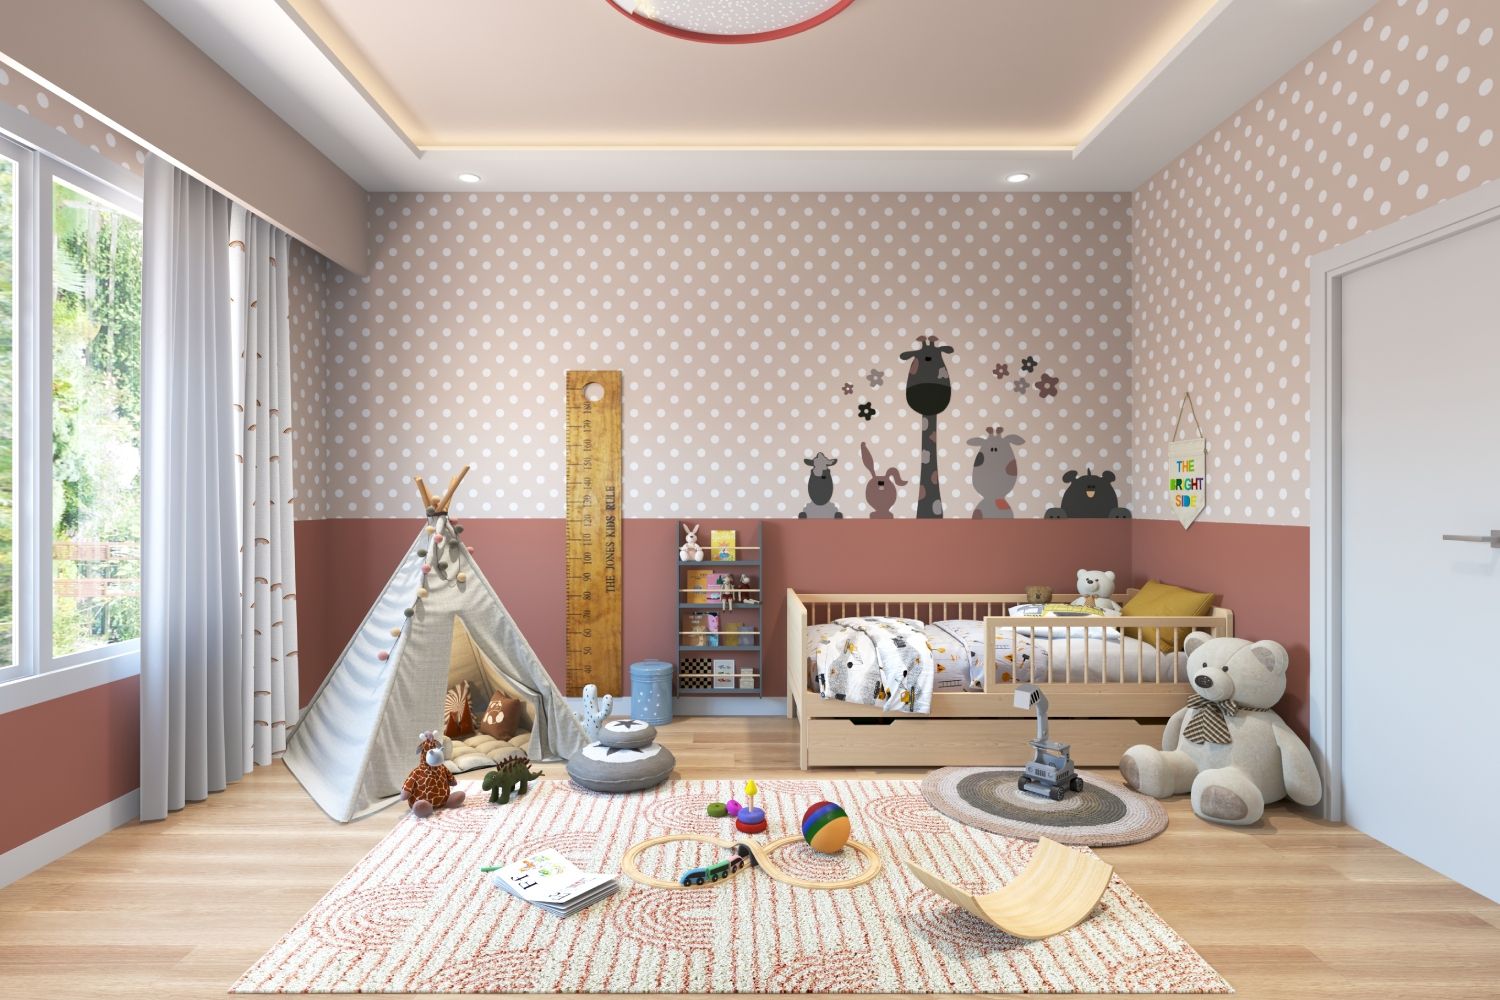 Contemporary Kids Room Design With A Wooden Single Bed And A Tent